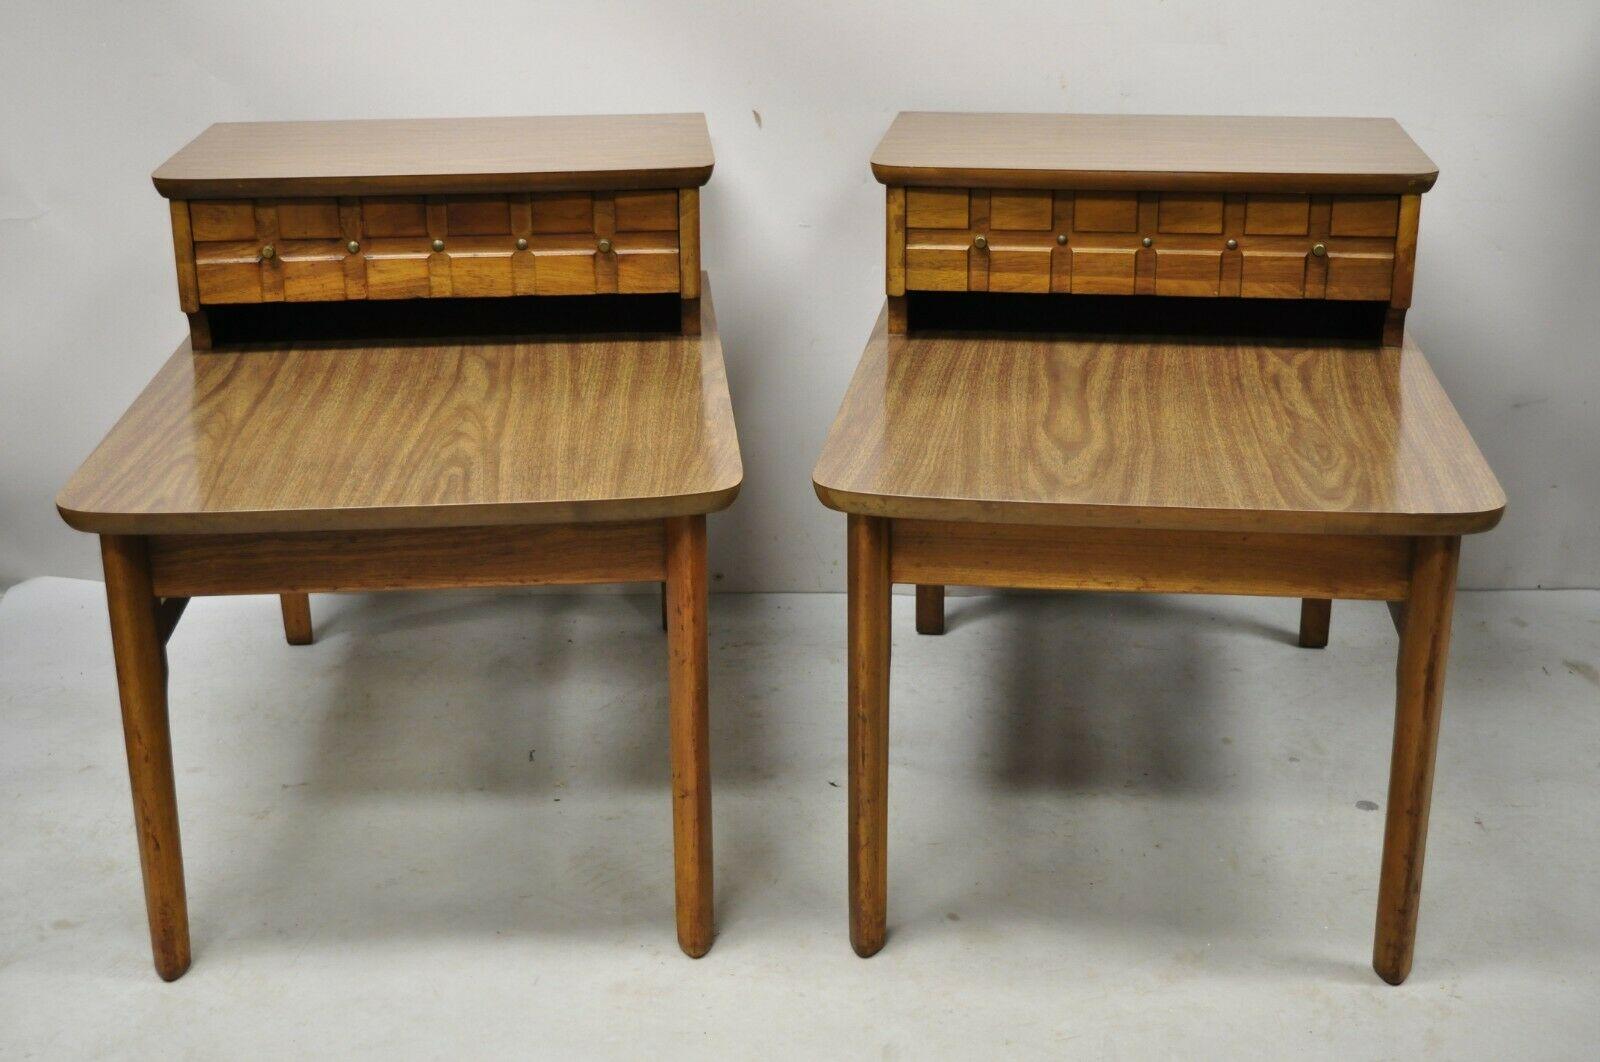 Mersman Mid Century Modern Walnut and Laminate Step End Tables - a Pair. Item features 2 tier laminated tops, stretcher base, original label, 1 dovetailed drawer, very nice vintage pair, quality American craftsmanship, great style and form. Circa